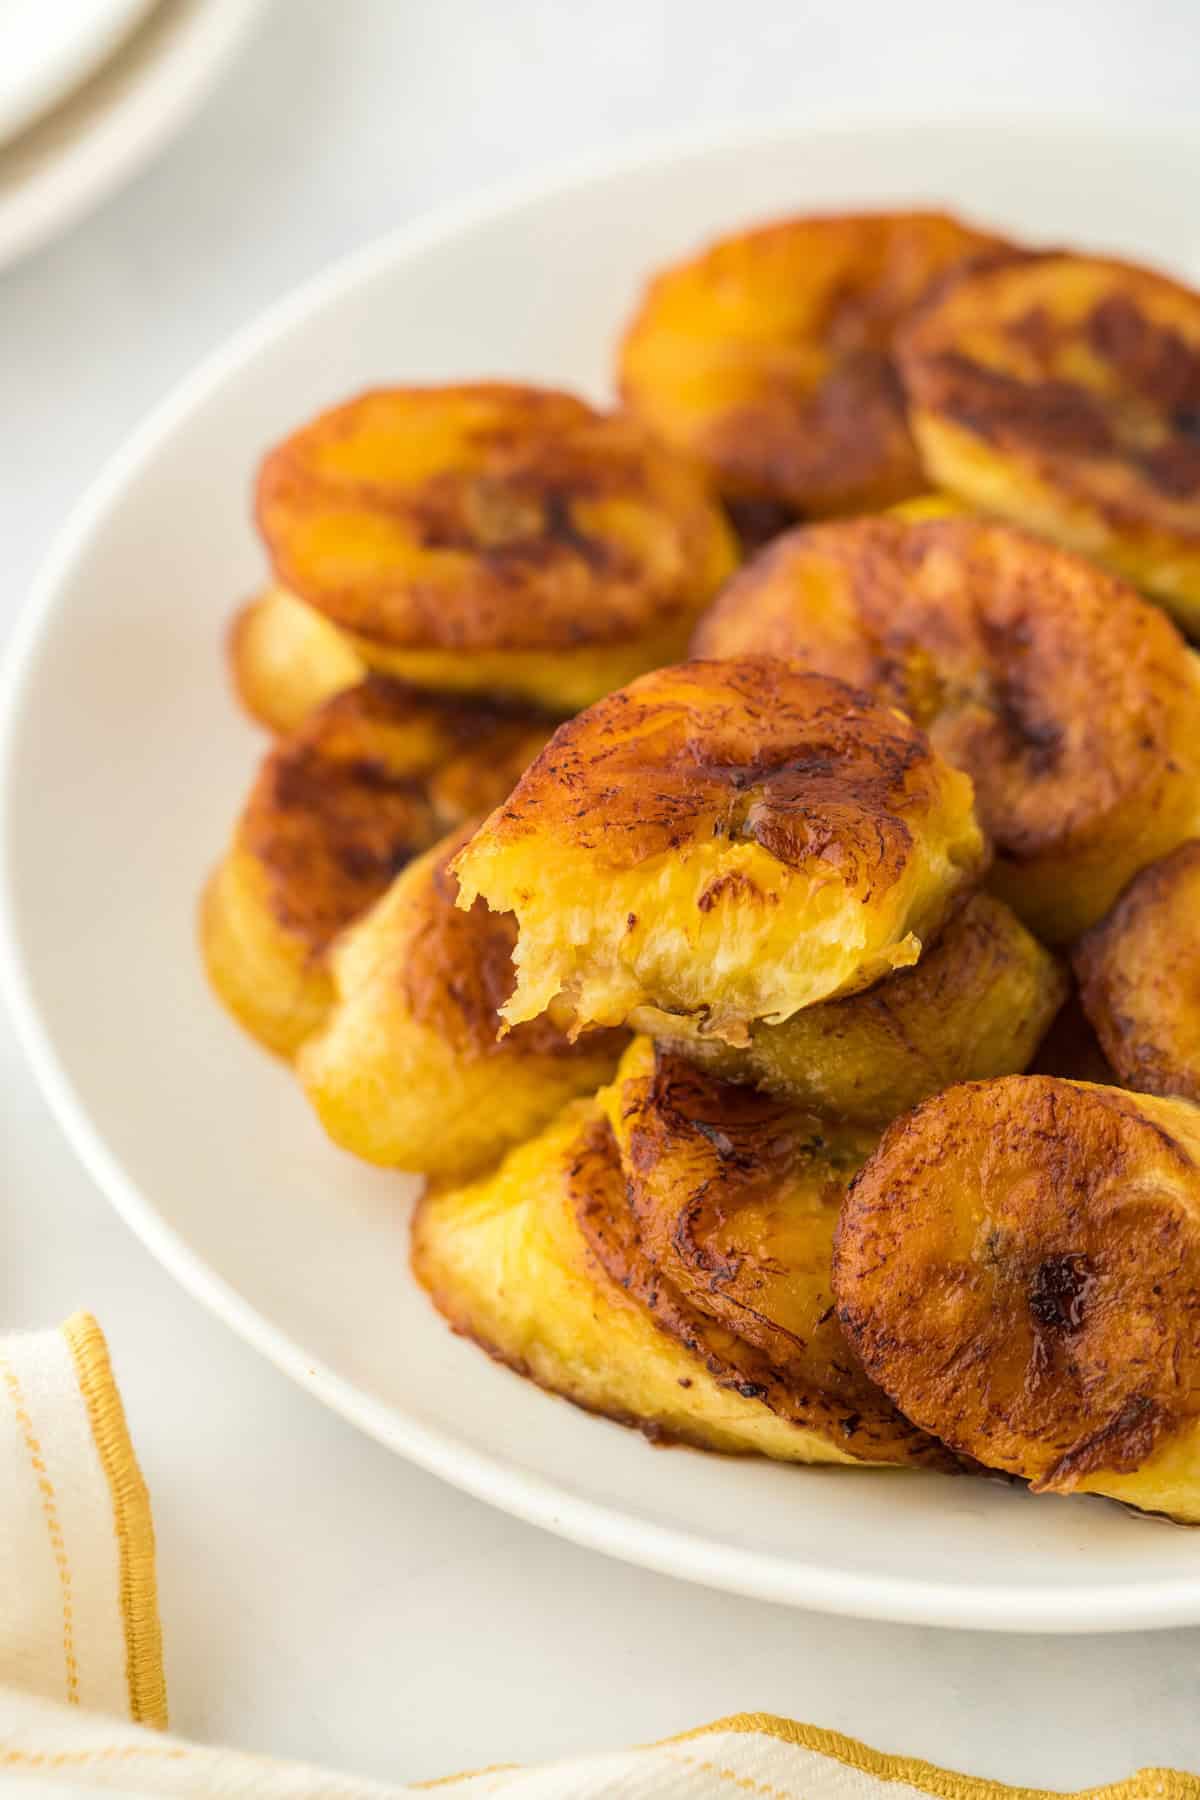 Slices of sweet fried plantains on a white plate with one bitten into